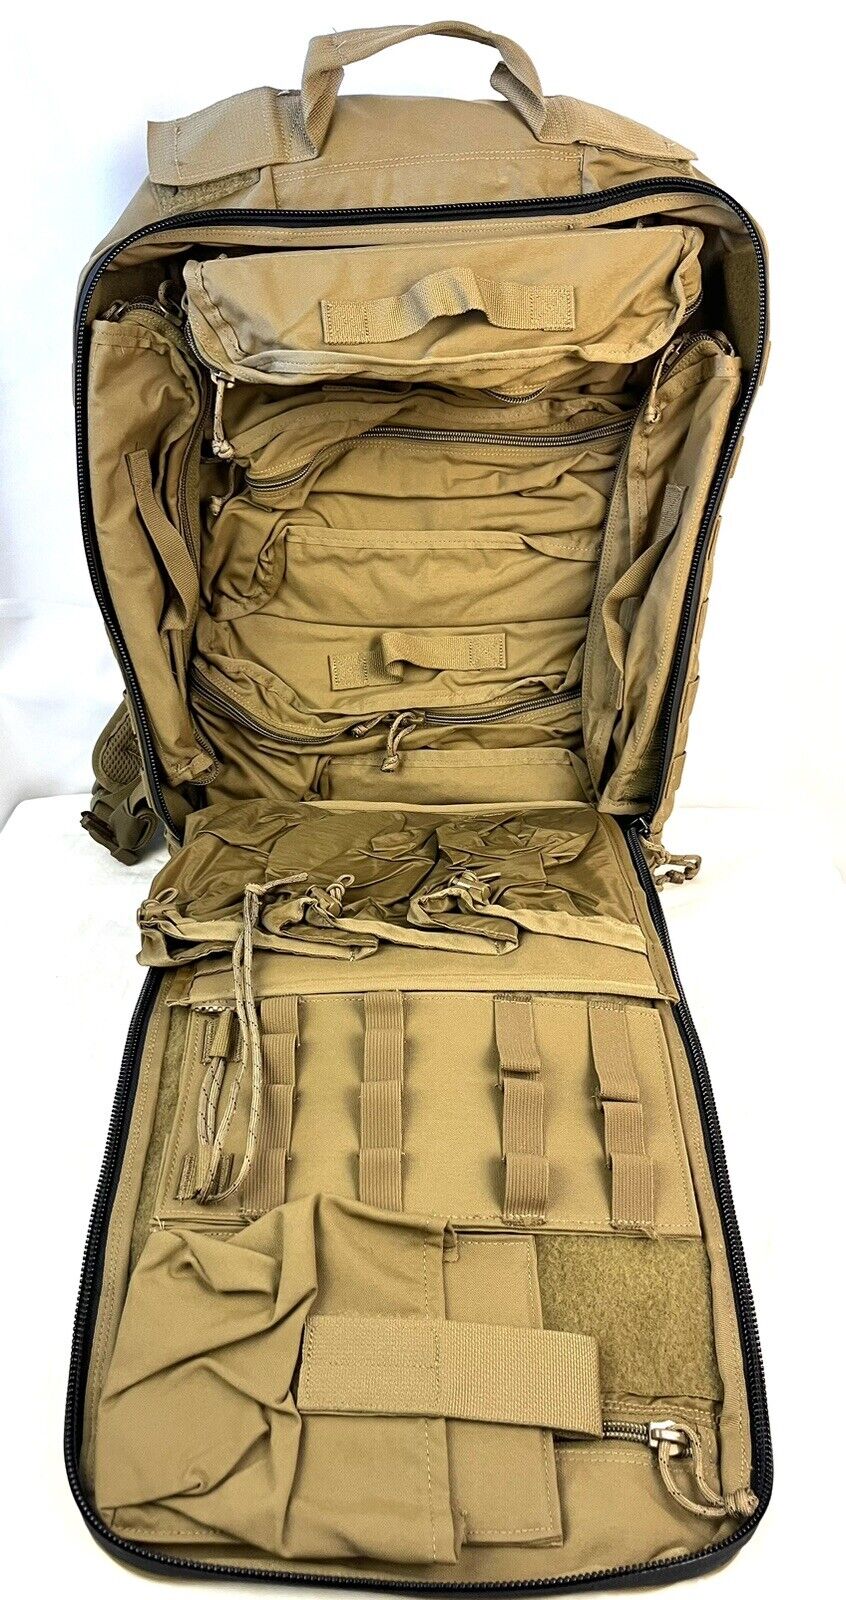 ~ USMC CORPSMAN MEDICAL ASSAULT PACK WITH POUCHES PROPPER INT'L COYOTE TAN USA